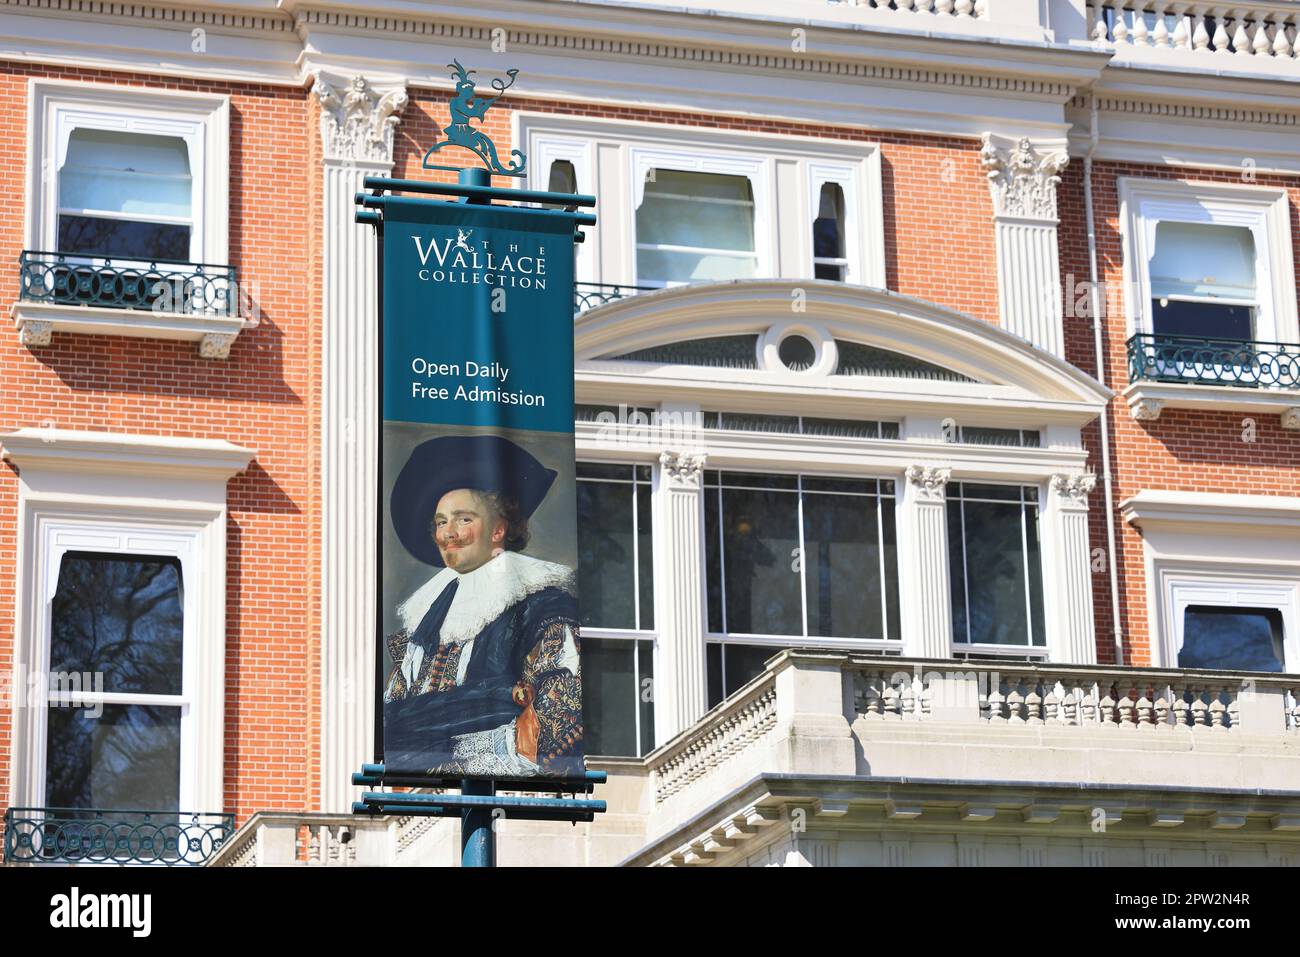 Exterior of The Wallace Collection, a national museum with paintings, sculpture, arms & armour and porcelain, on Manchester Square, London, UK Stock Photo